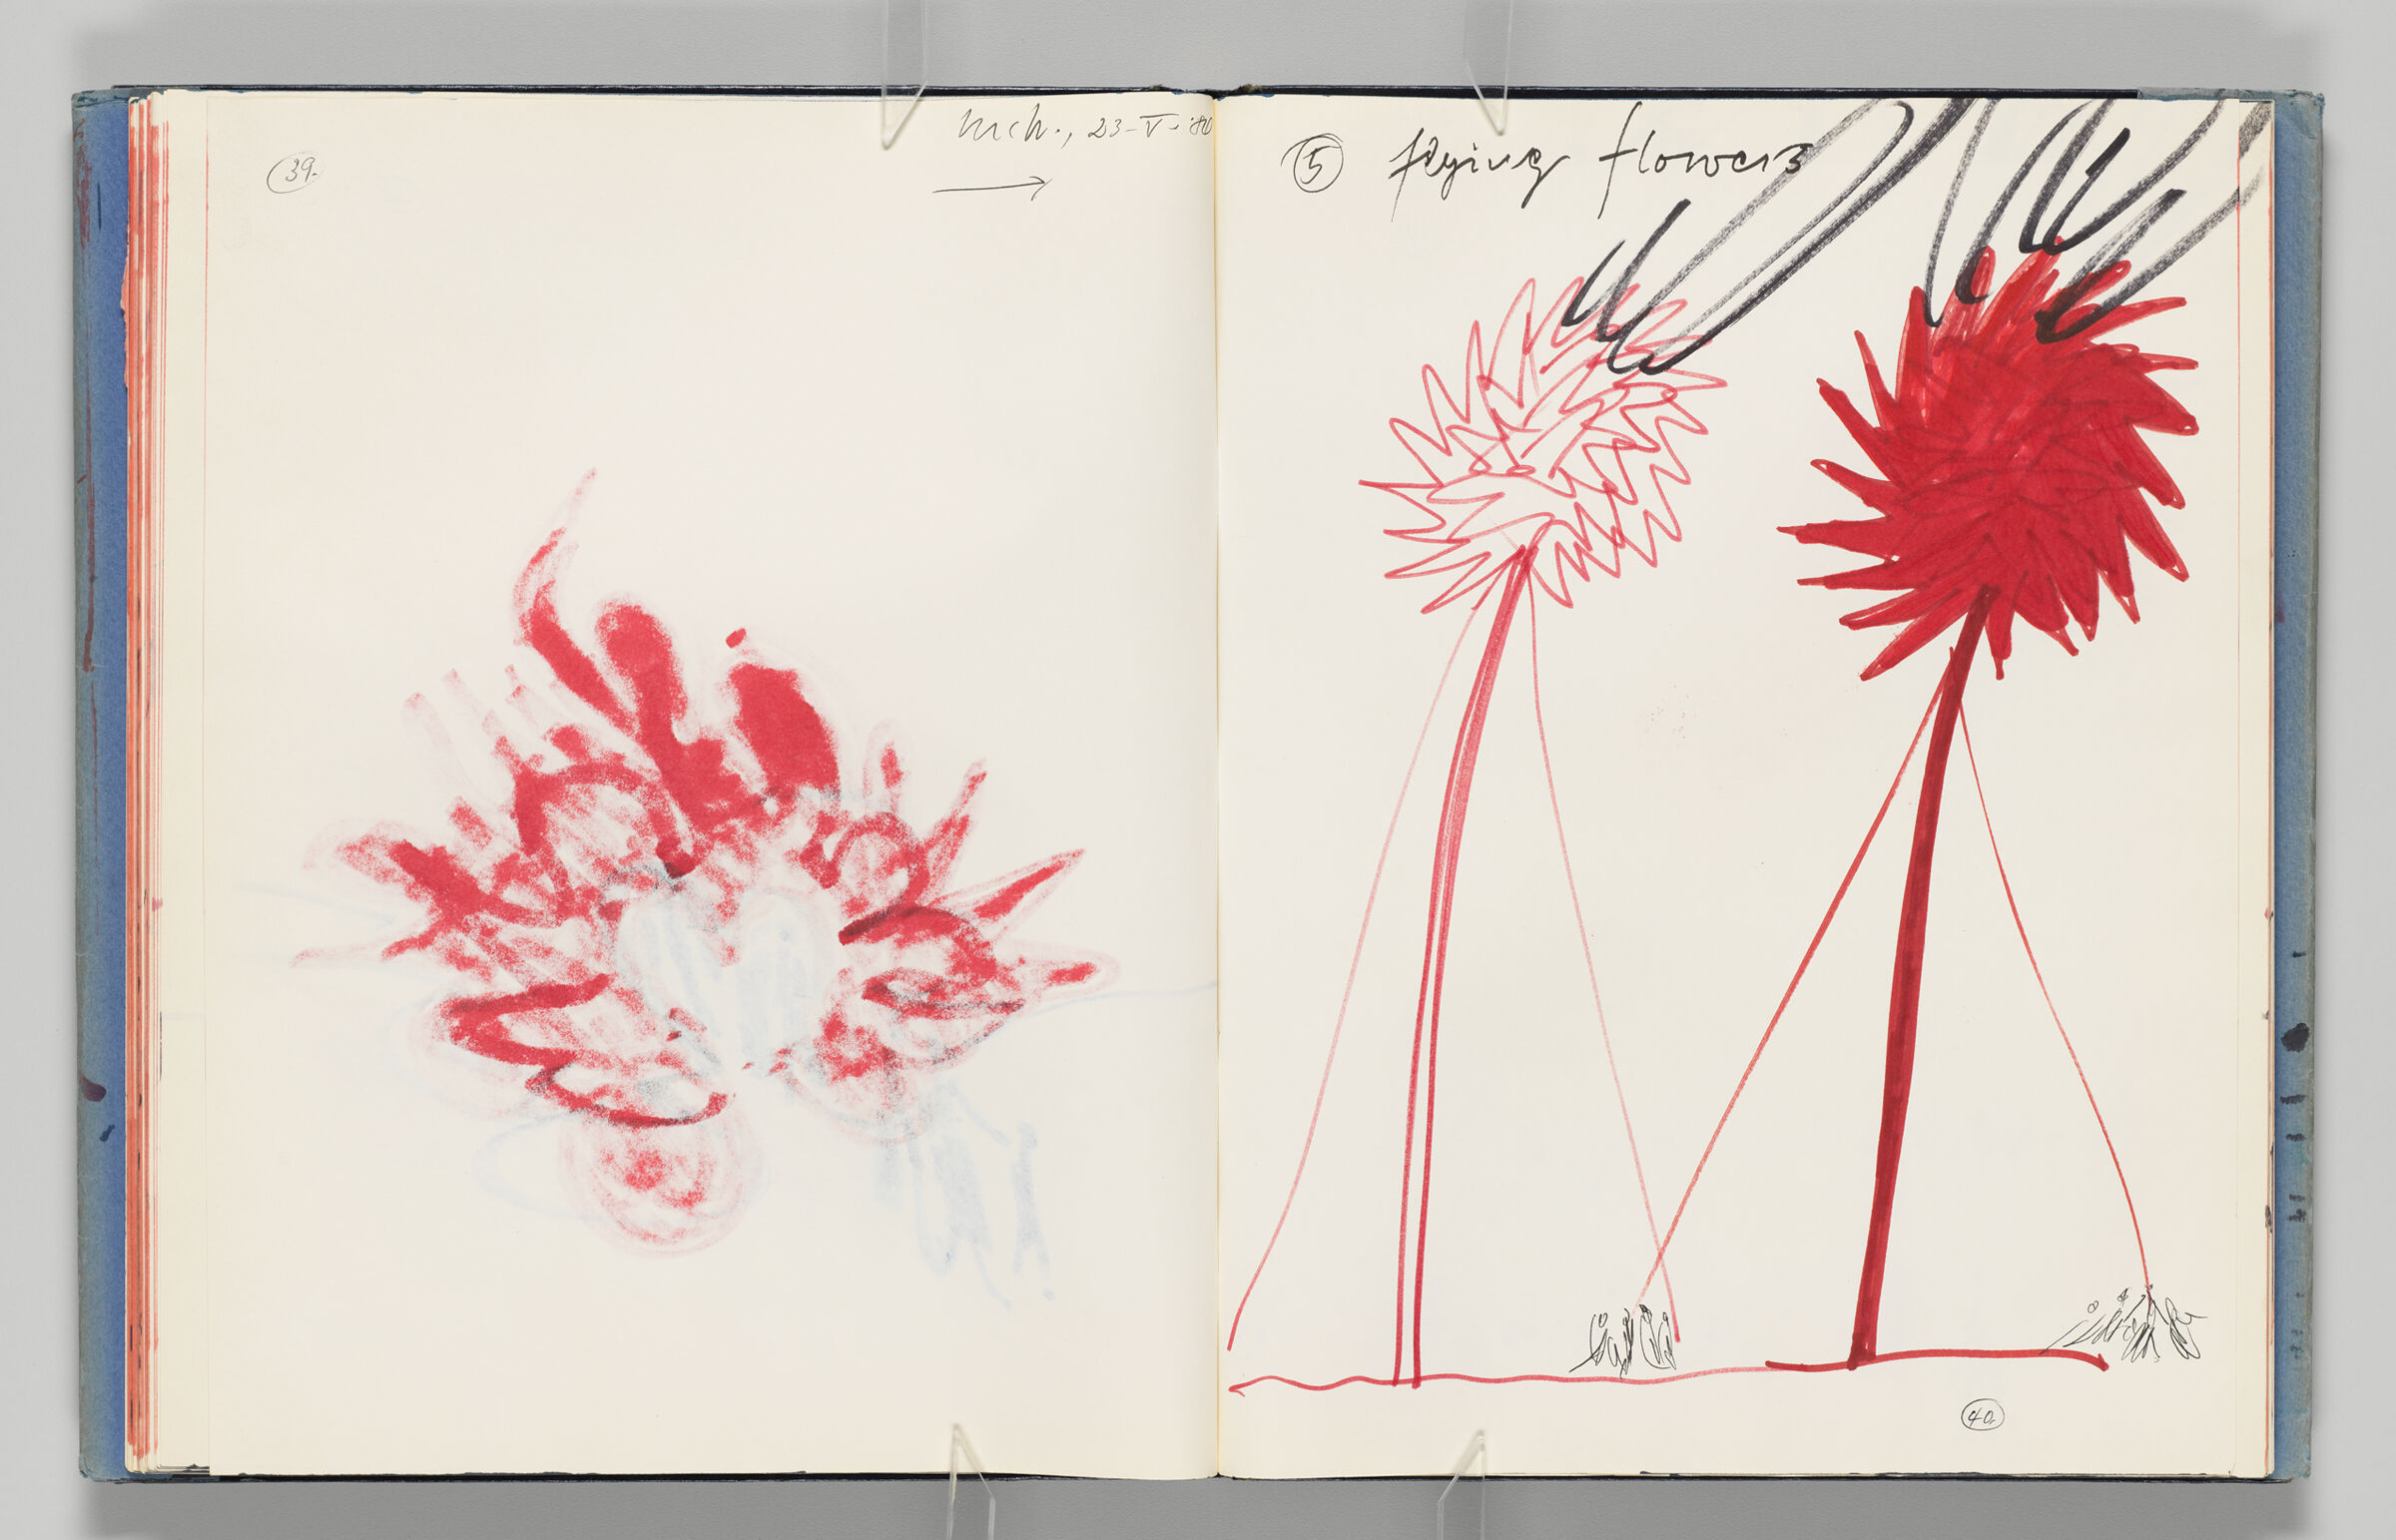 Untitled (Bleed-Through Of Previous Page With Page Number And Note, Left Page); Untitled (Designs For 